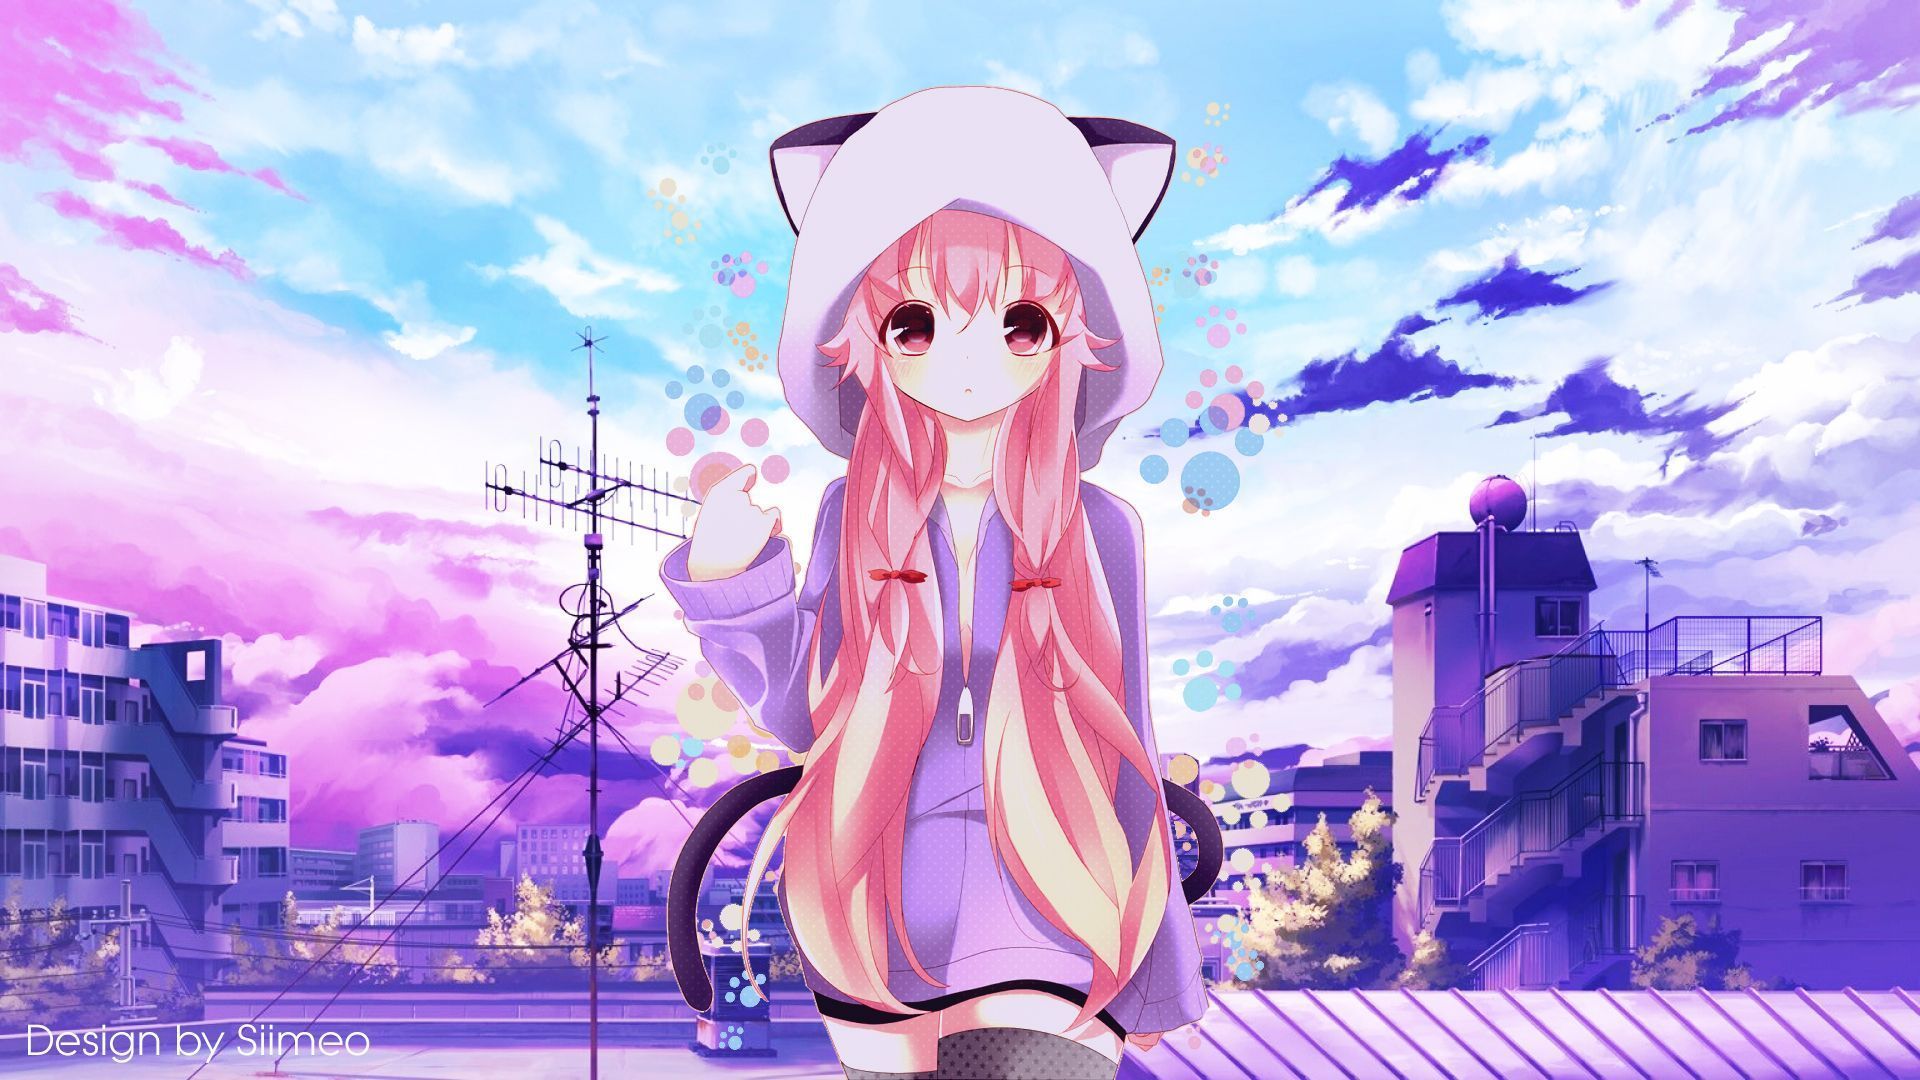 Share 85+ pink wallpapers anime latest - in.cdgdbentre